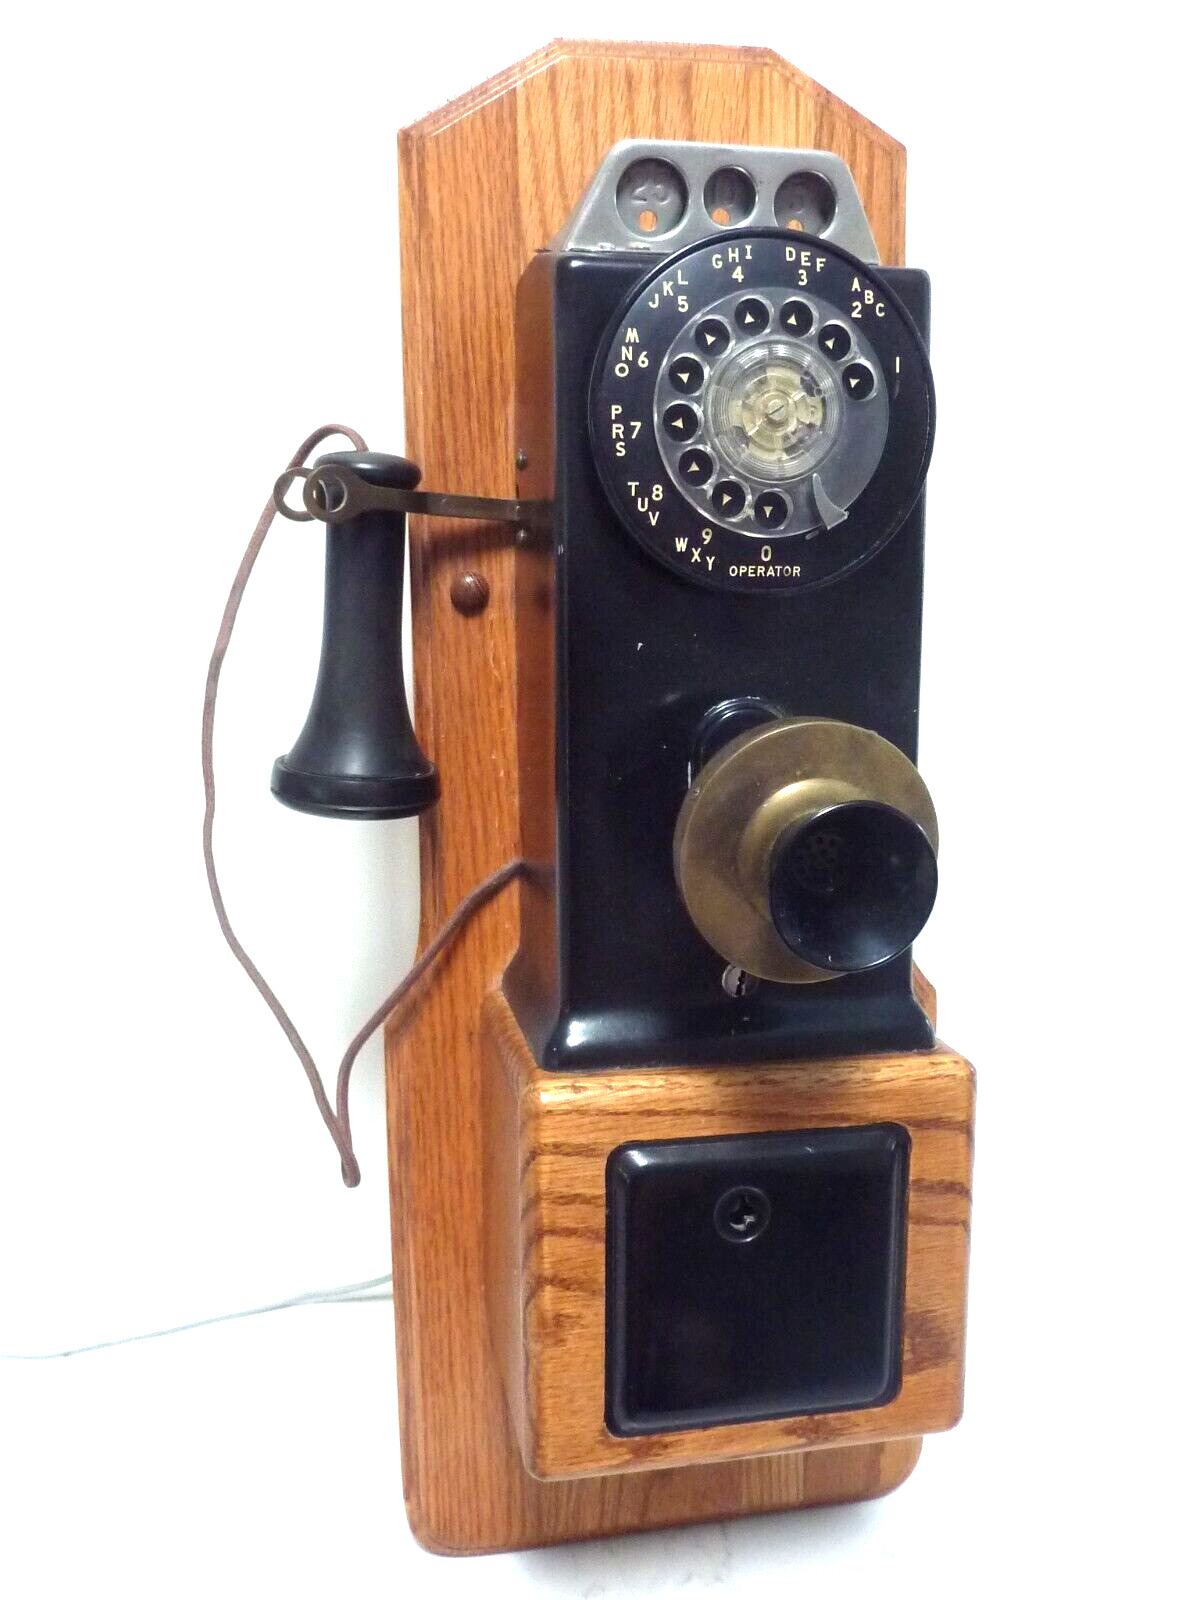 Vintage 1940\'s Automatic Electric 3-Slot Coin Pay Wall Telephone from the 1970\'s